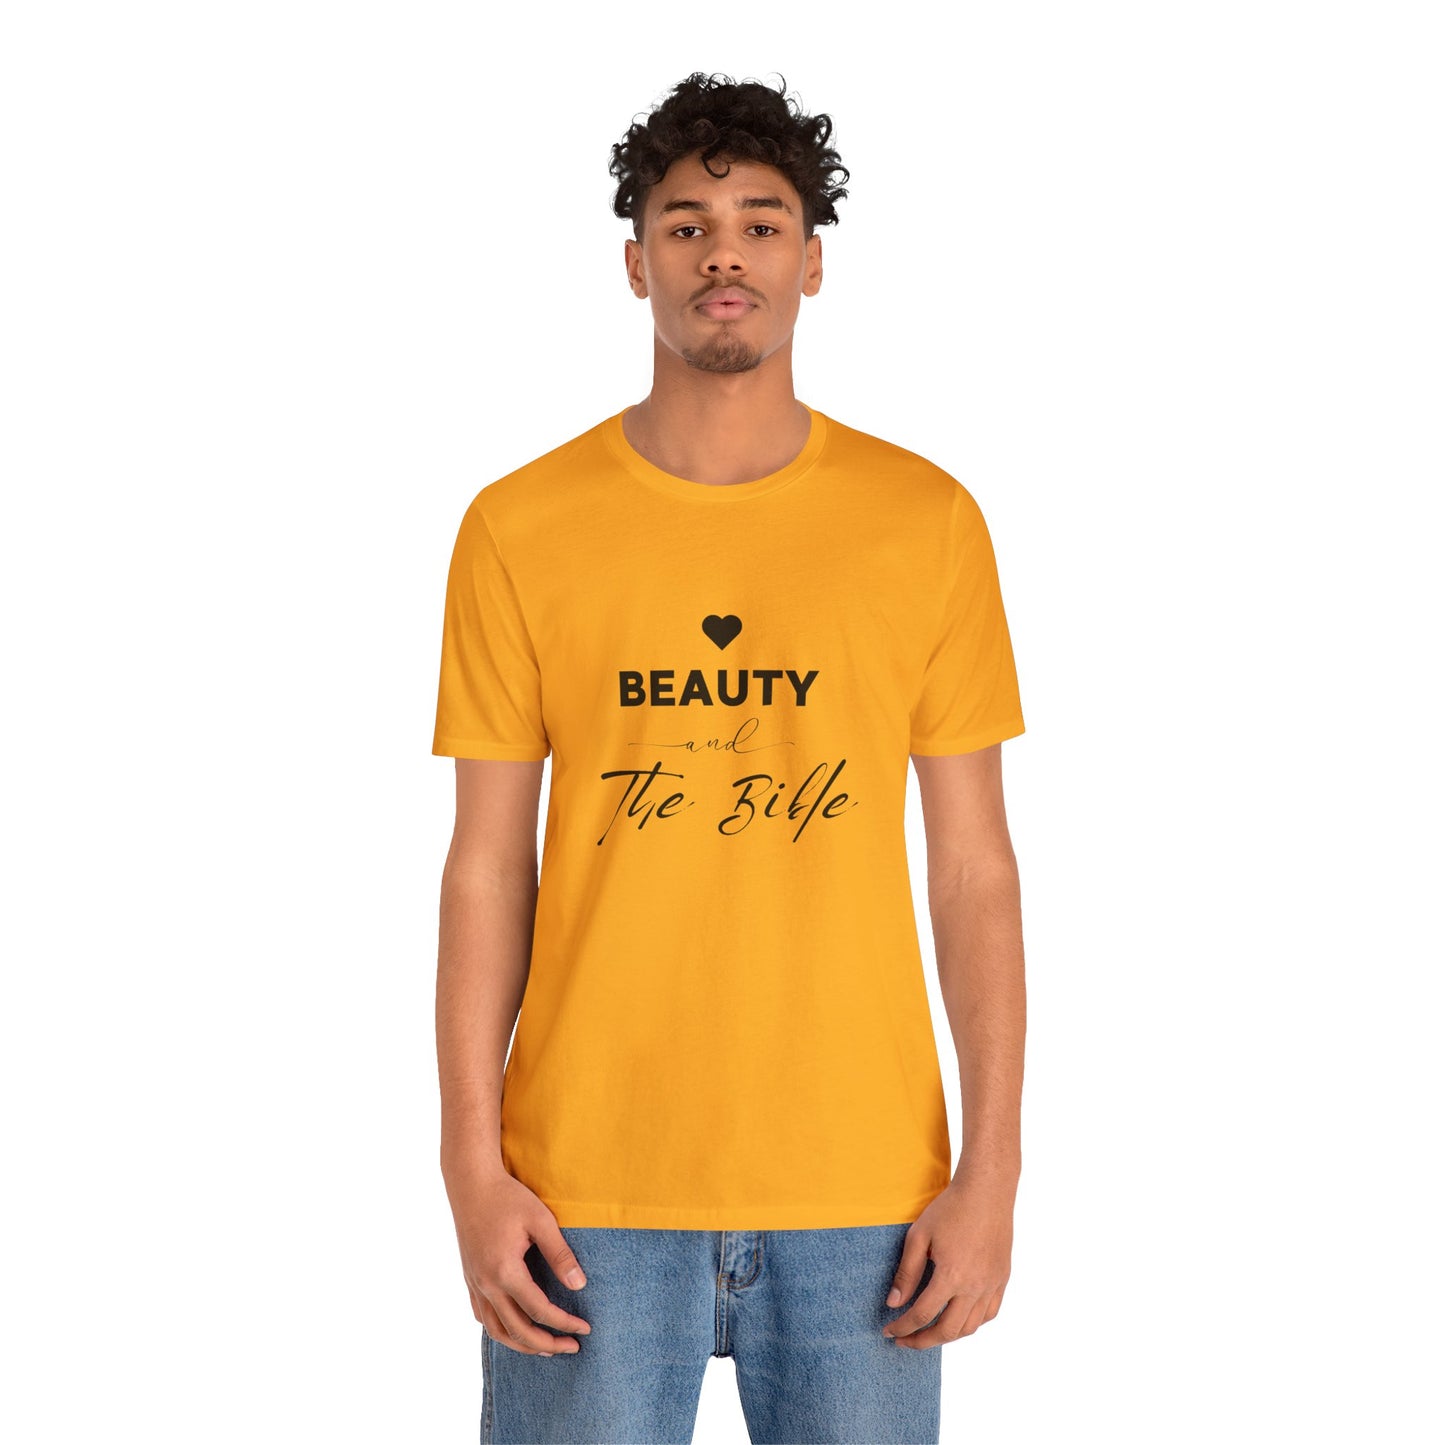 Beauty and the Bible Unisex Jersey Short Sleeve Tee